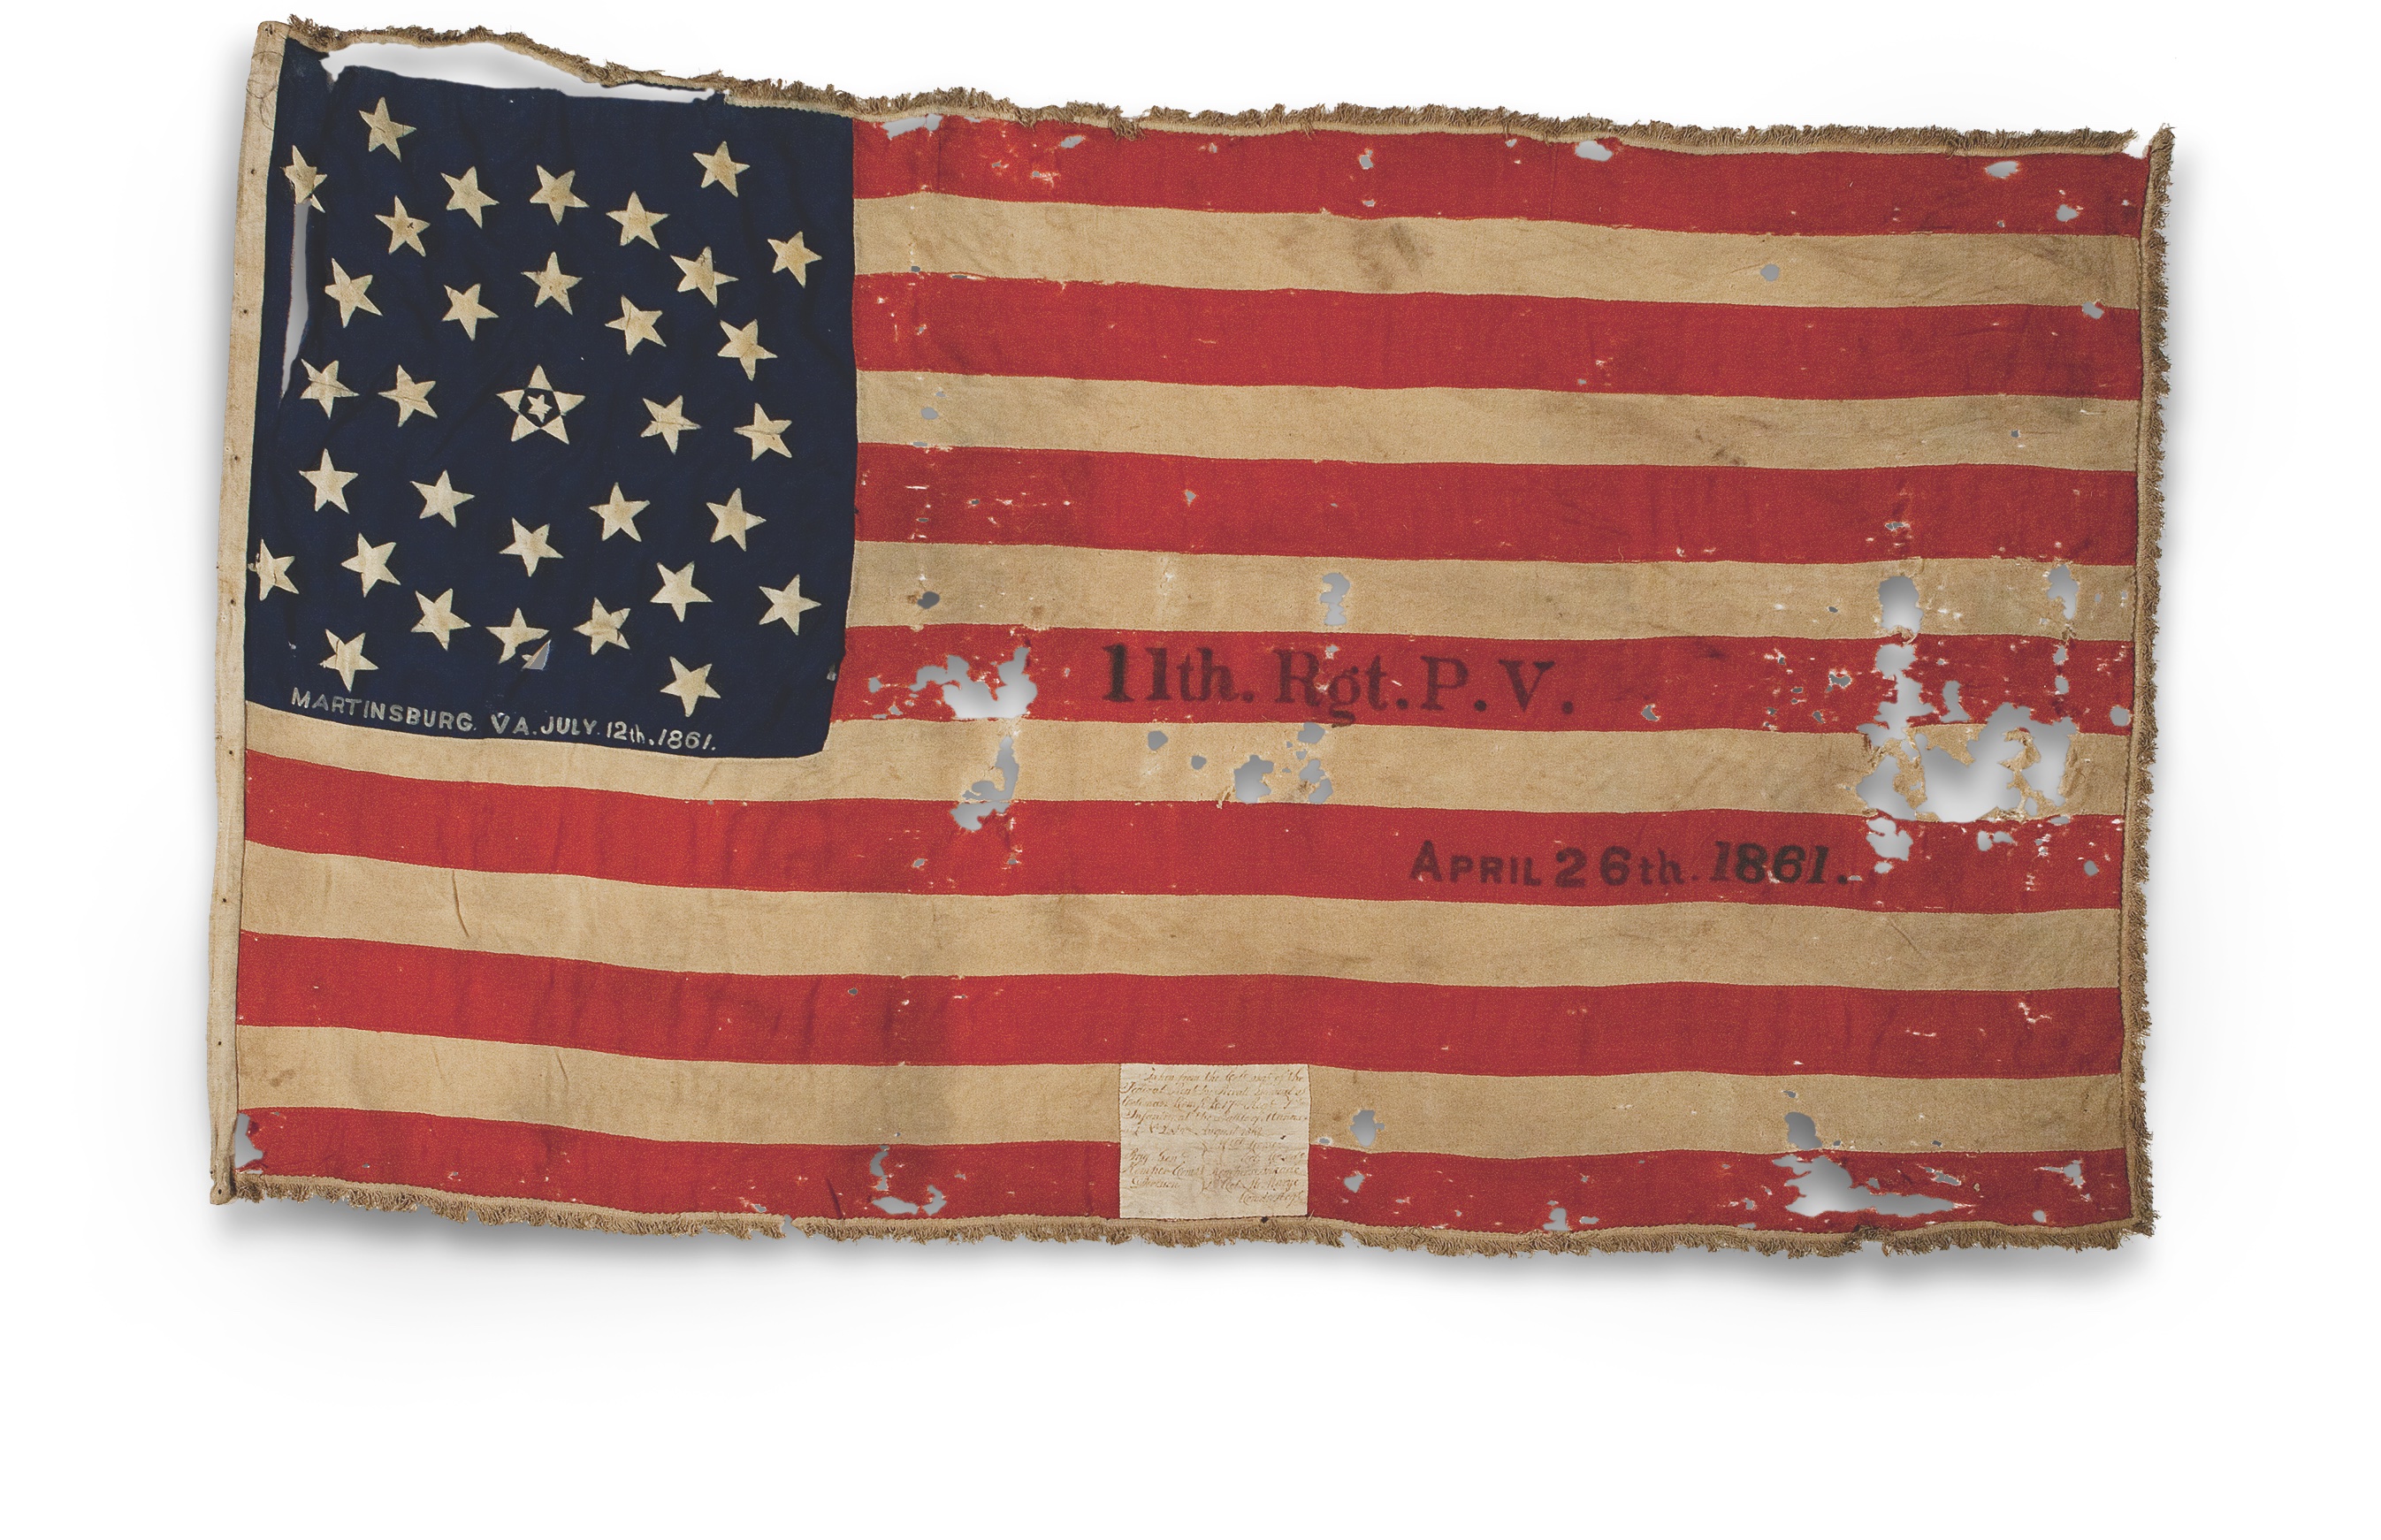 Flag of the 11th Pennsylvania, which fought at the July 2, 1861, Battle of Hoke’s Run. (Brian Hunt & Pennsylvania Capitol Preservation Committee)